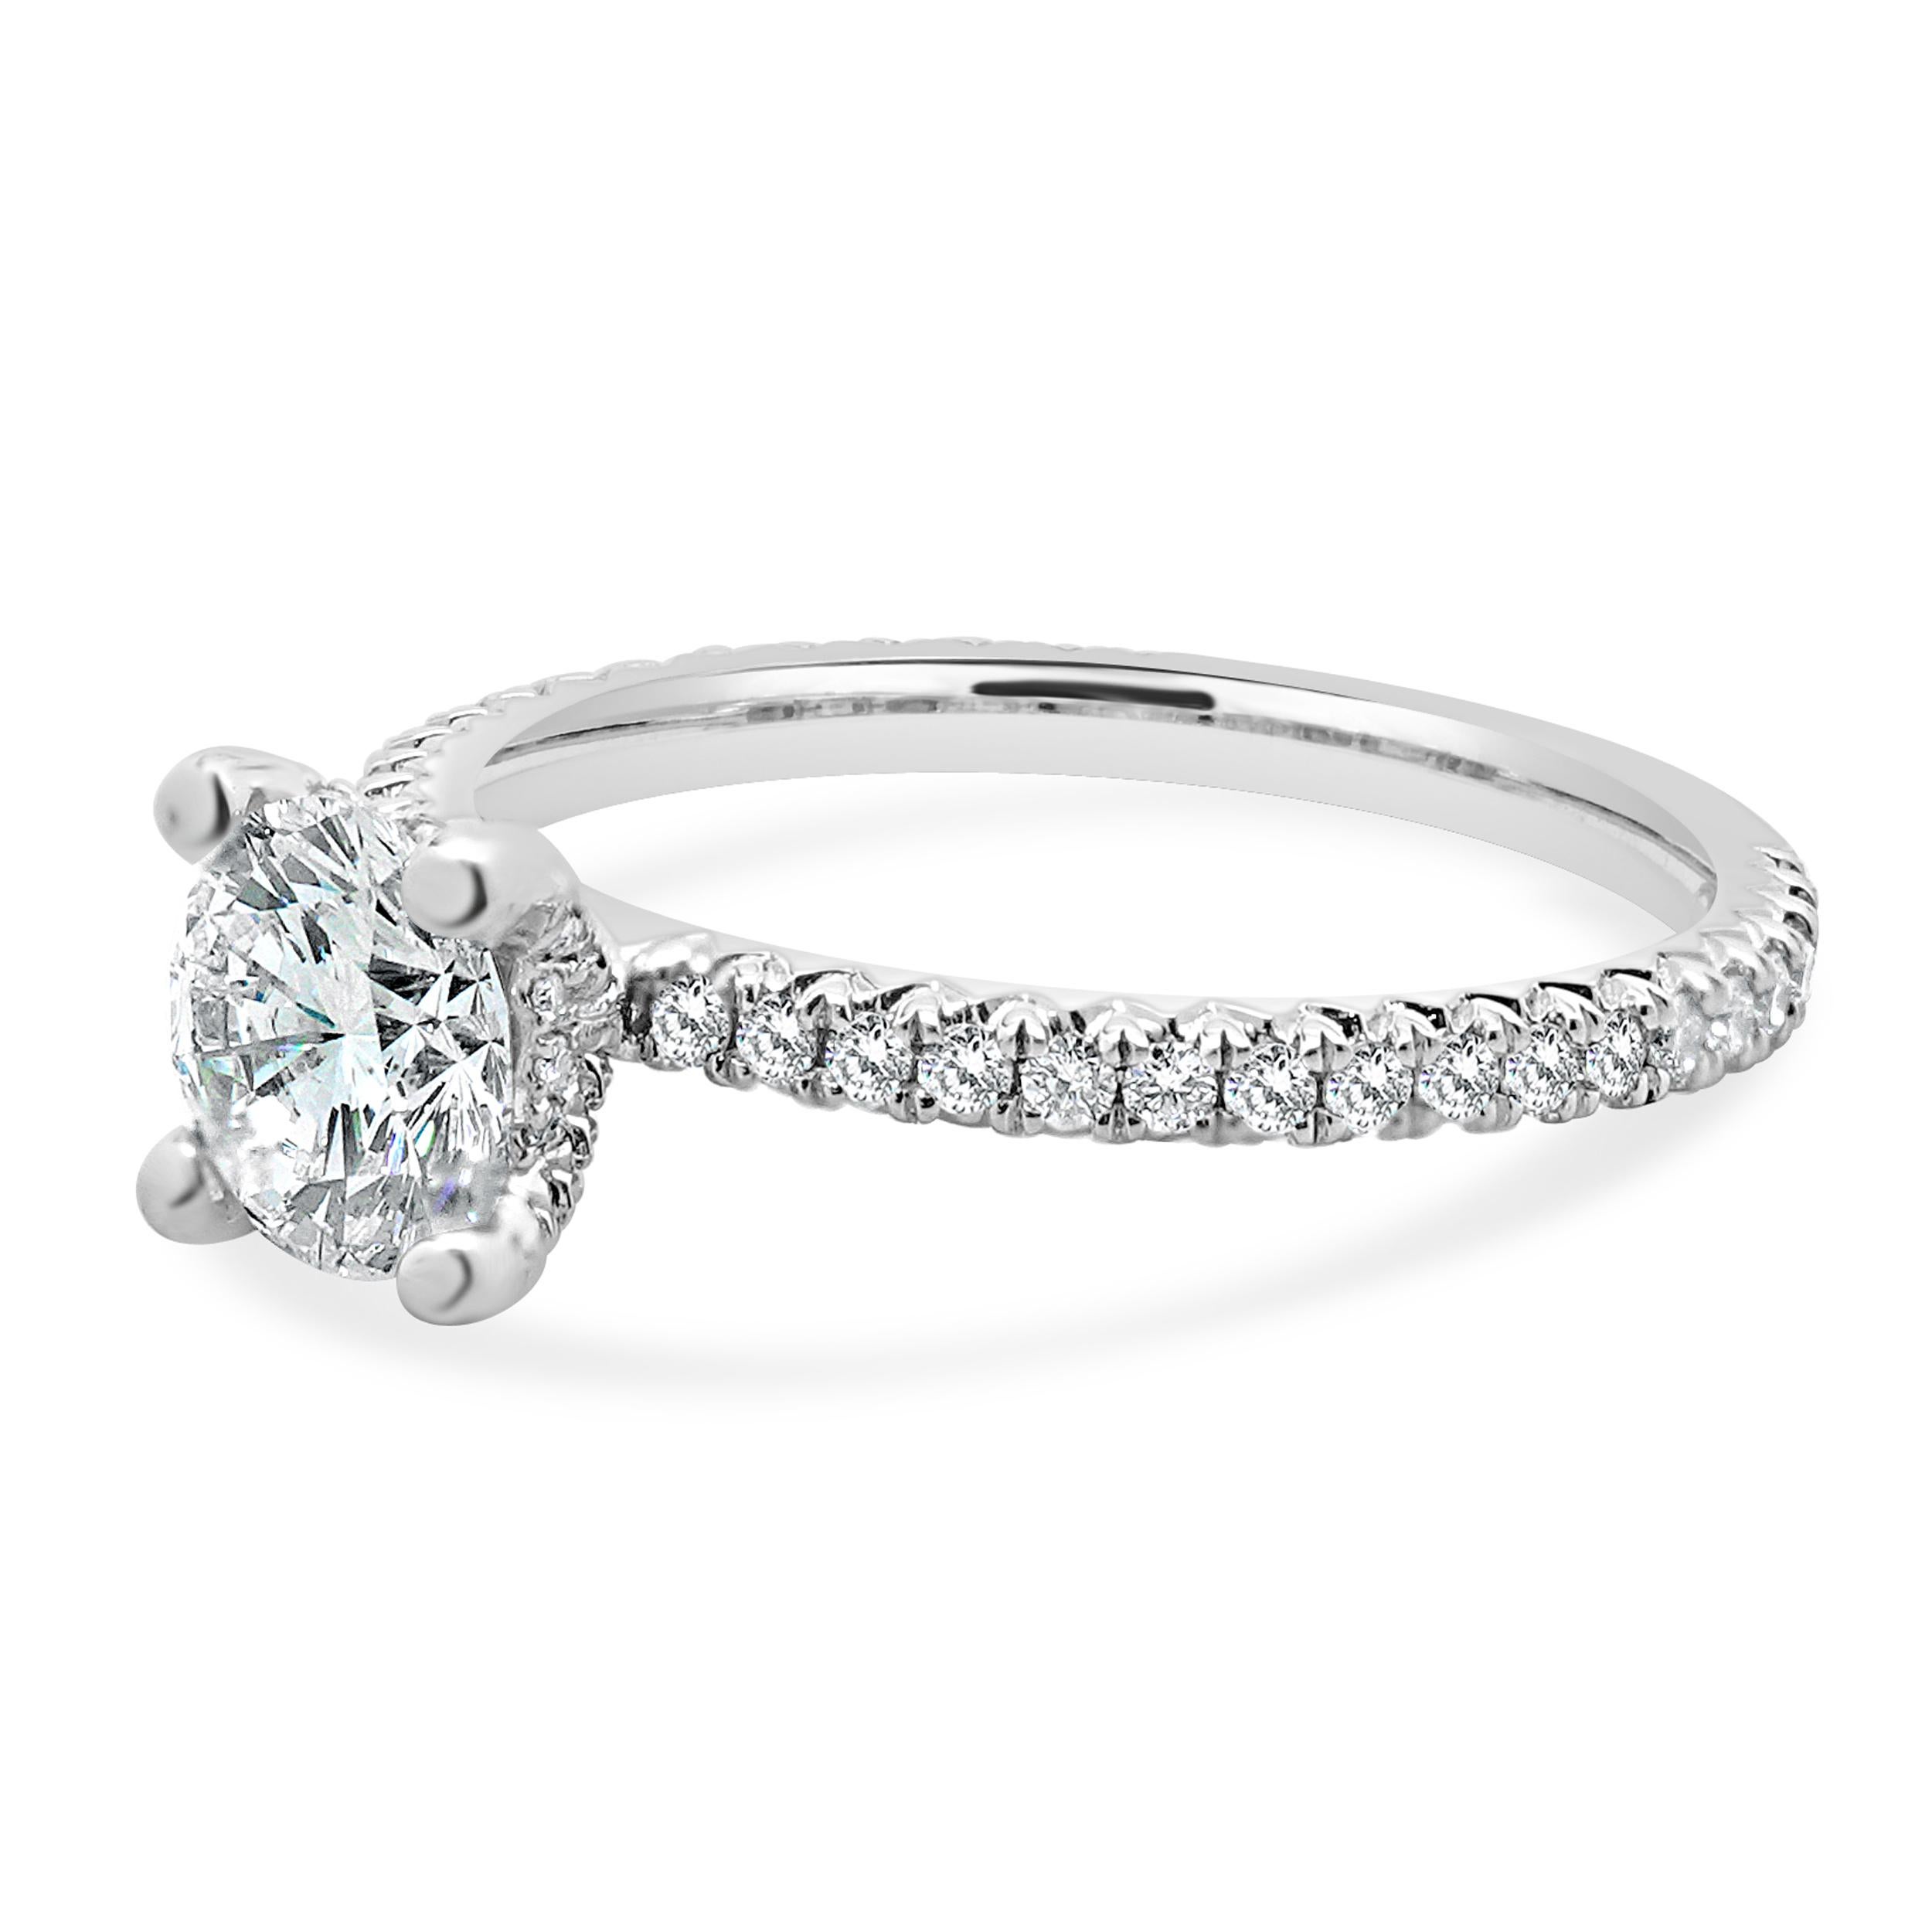 Designer: custom
Material: 14K White Gold
Diamond: 1 round brilliant cut = 1.02ct
Color: H
Clarity: VS2
Diamond:  round brilliant = 0.45cttw
Color: G
Clarity: SI1
Ring Size: 6.5 (complimentary sizing available)
Weight: 2.45 grams
